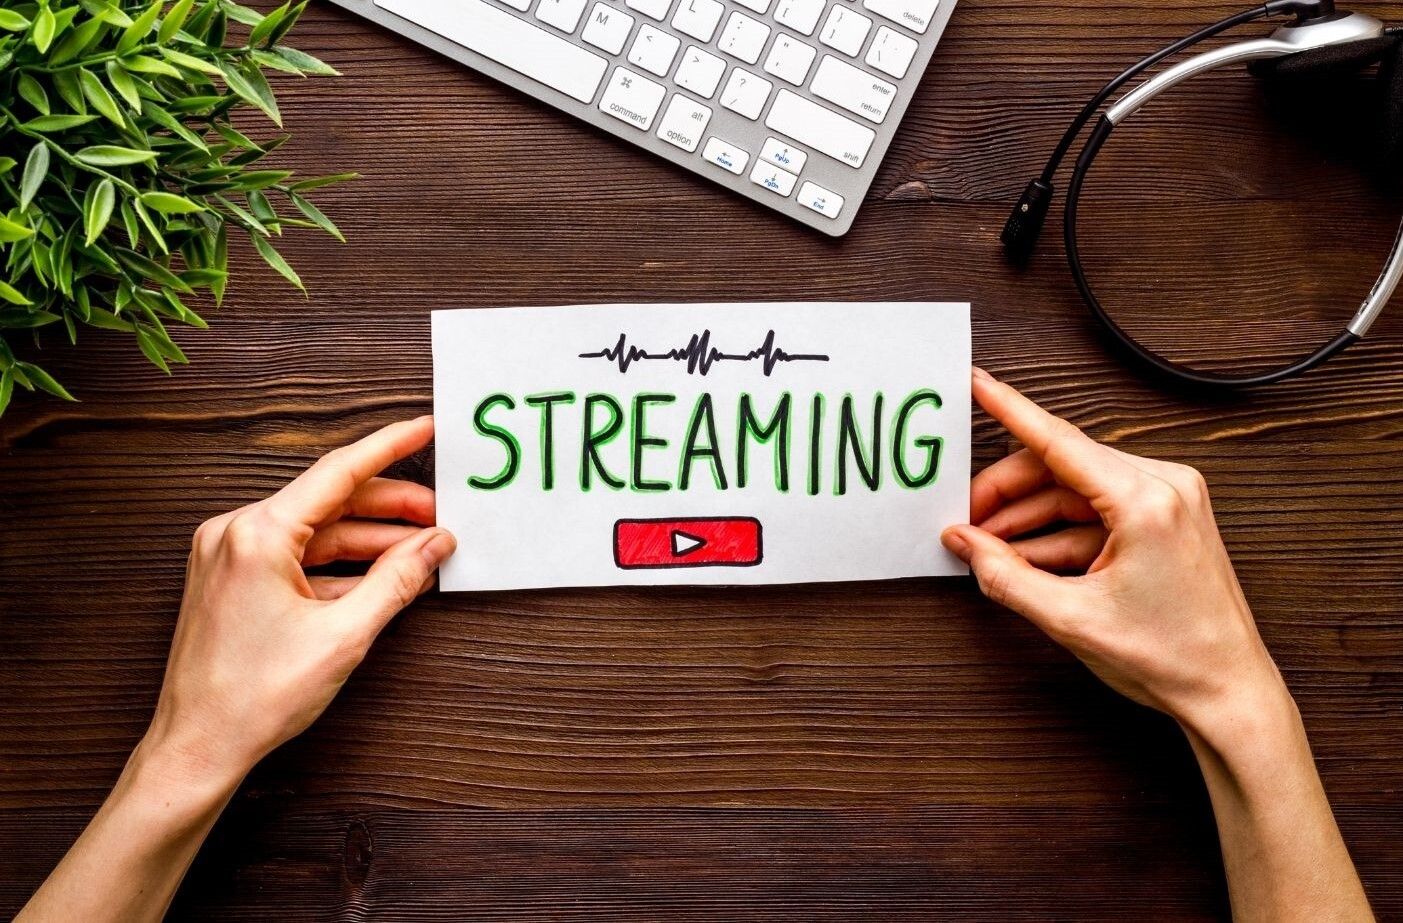 Livestreaming Industry in 2021 and Beyond